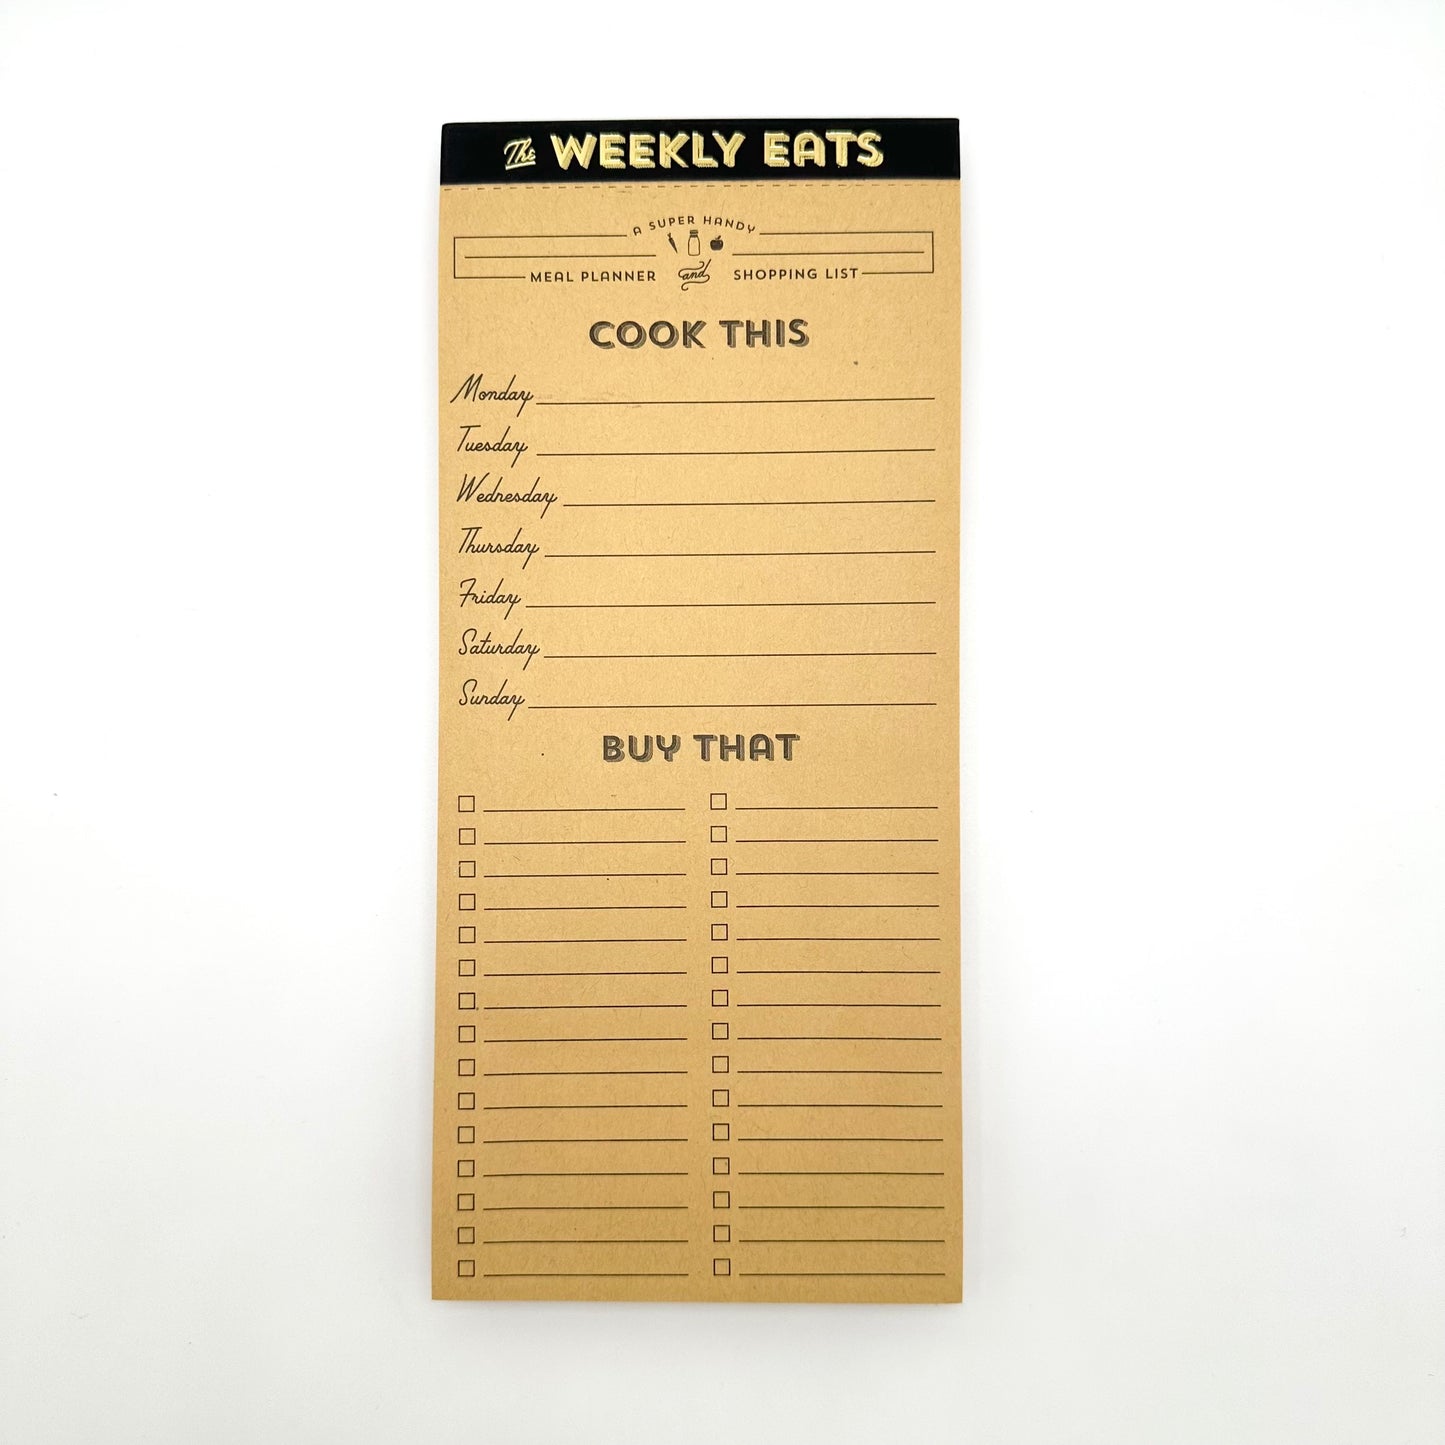 Weekly meal planner notepad. Top portion of the pad has days of the week, bottom portion has a checklist for grocery items to buy.